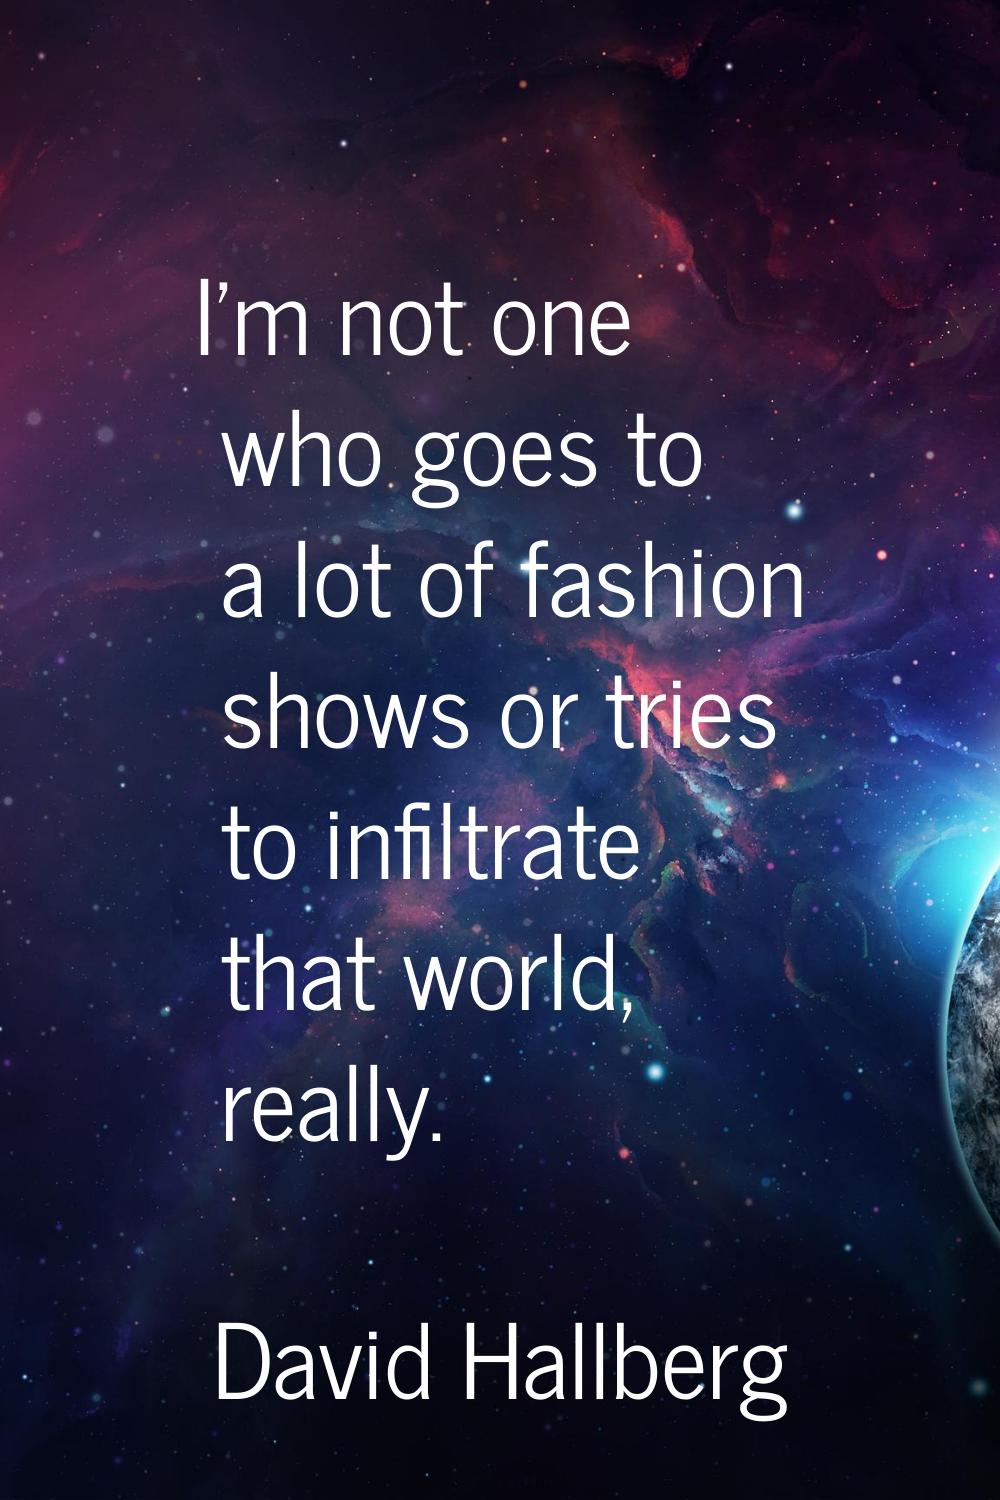 I'm not one who goes to a lot of fashion shows or tries to infiltrate that world, really.